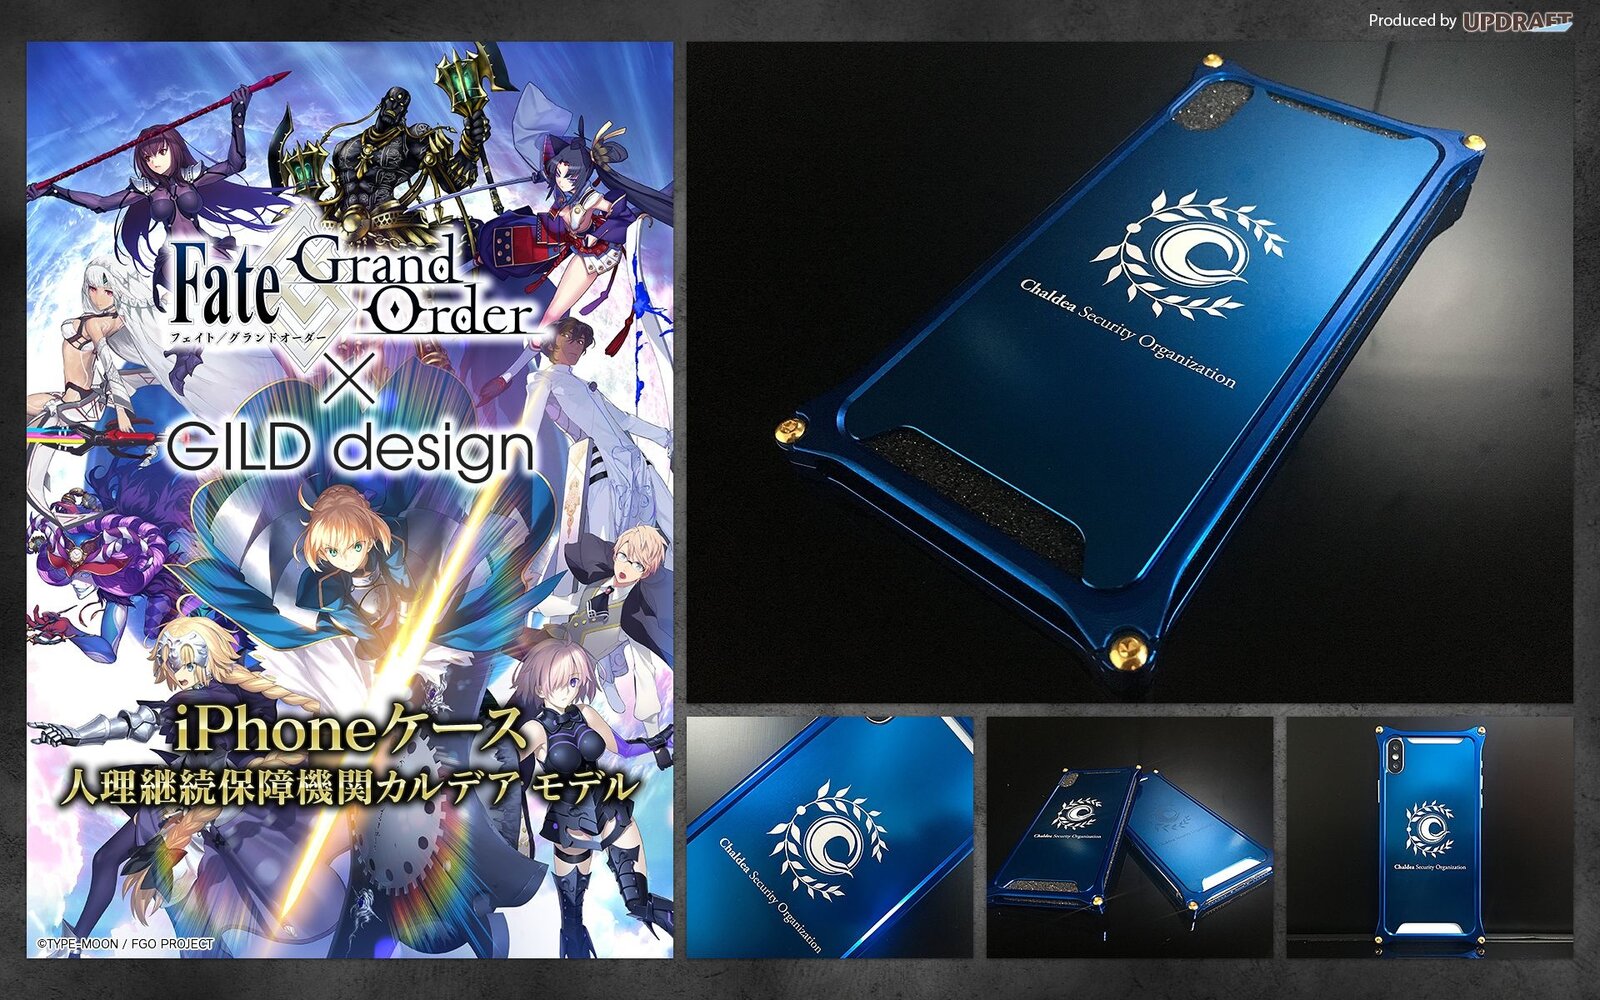 Fate/Grand Order's Chaldea Inspires Sturdy iPhone Case! | Product